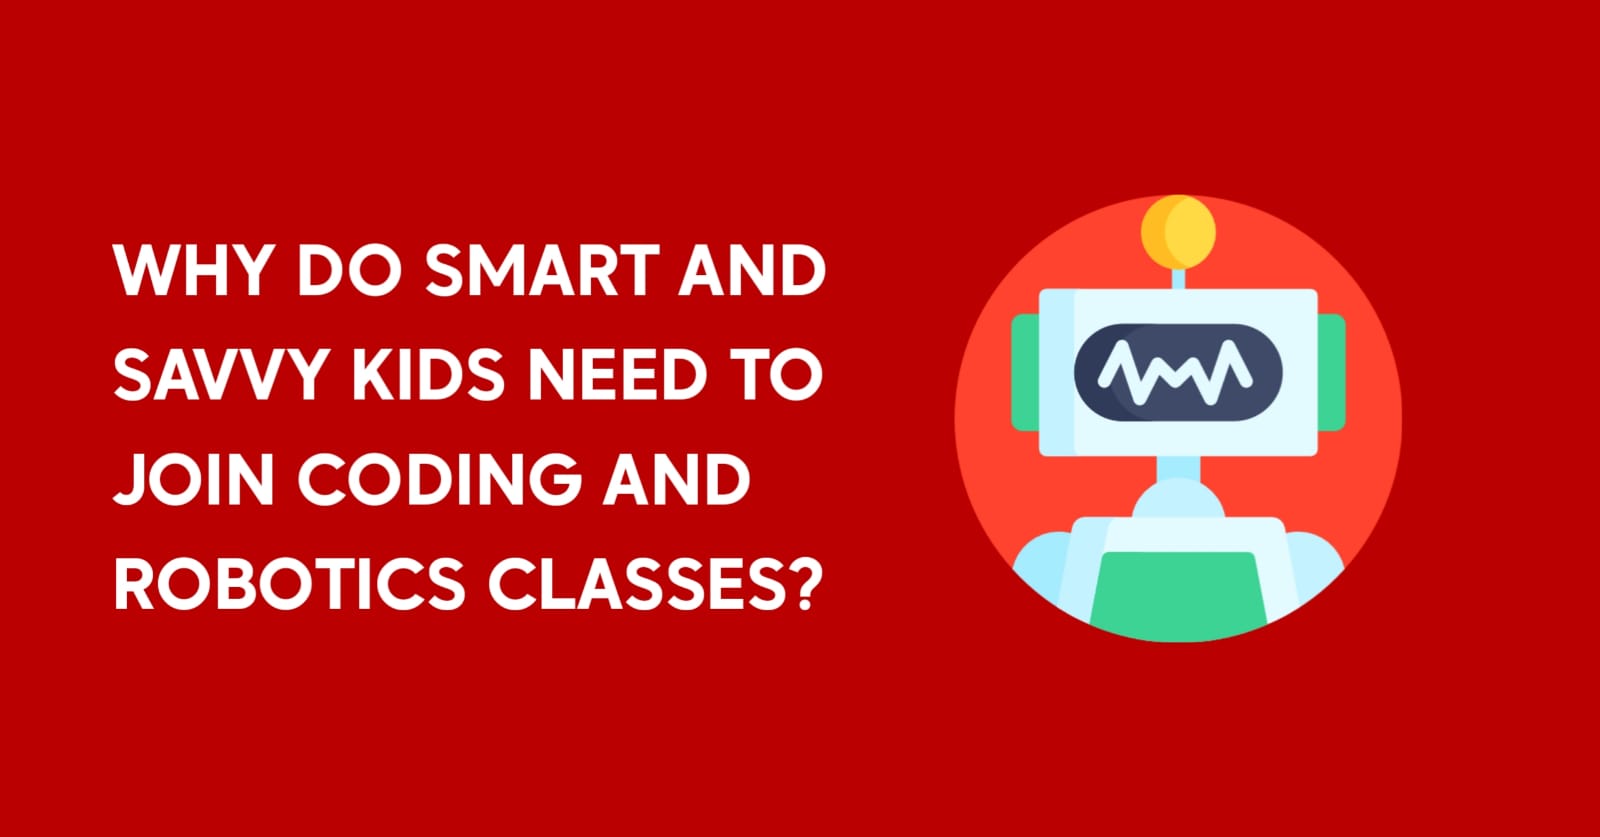 Why Do Smart And Savvy Kids Need To Join Coding And Robotics Classes?